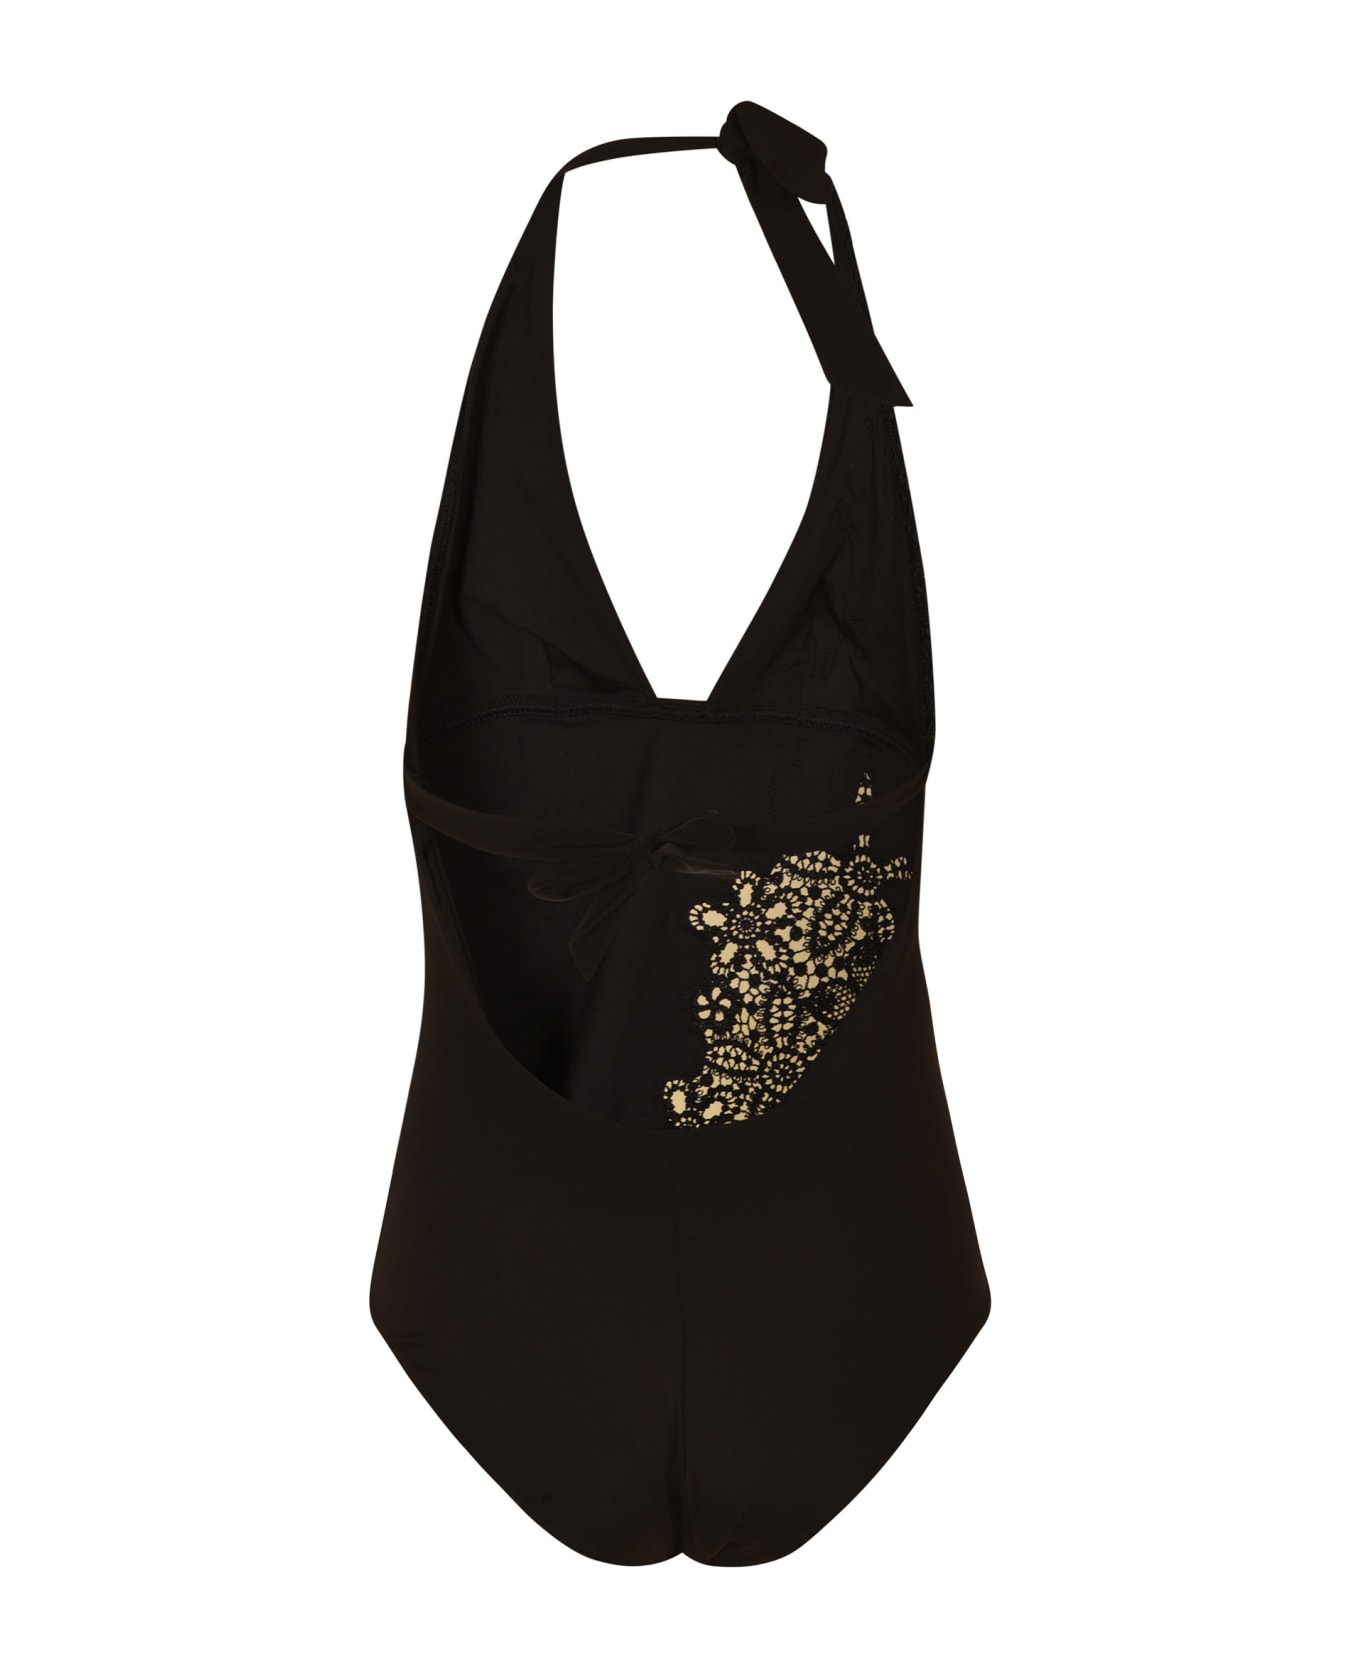 Ermanno Scervino Floral Perforated Swimsuit - Black